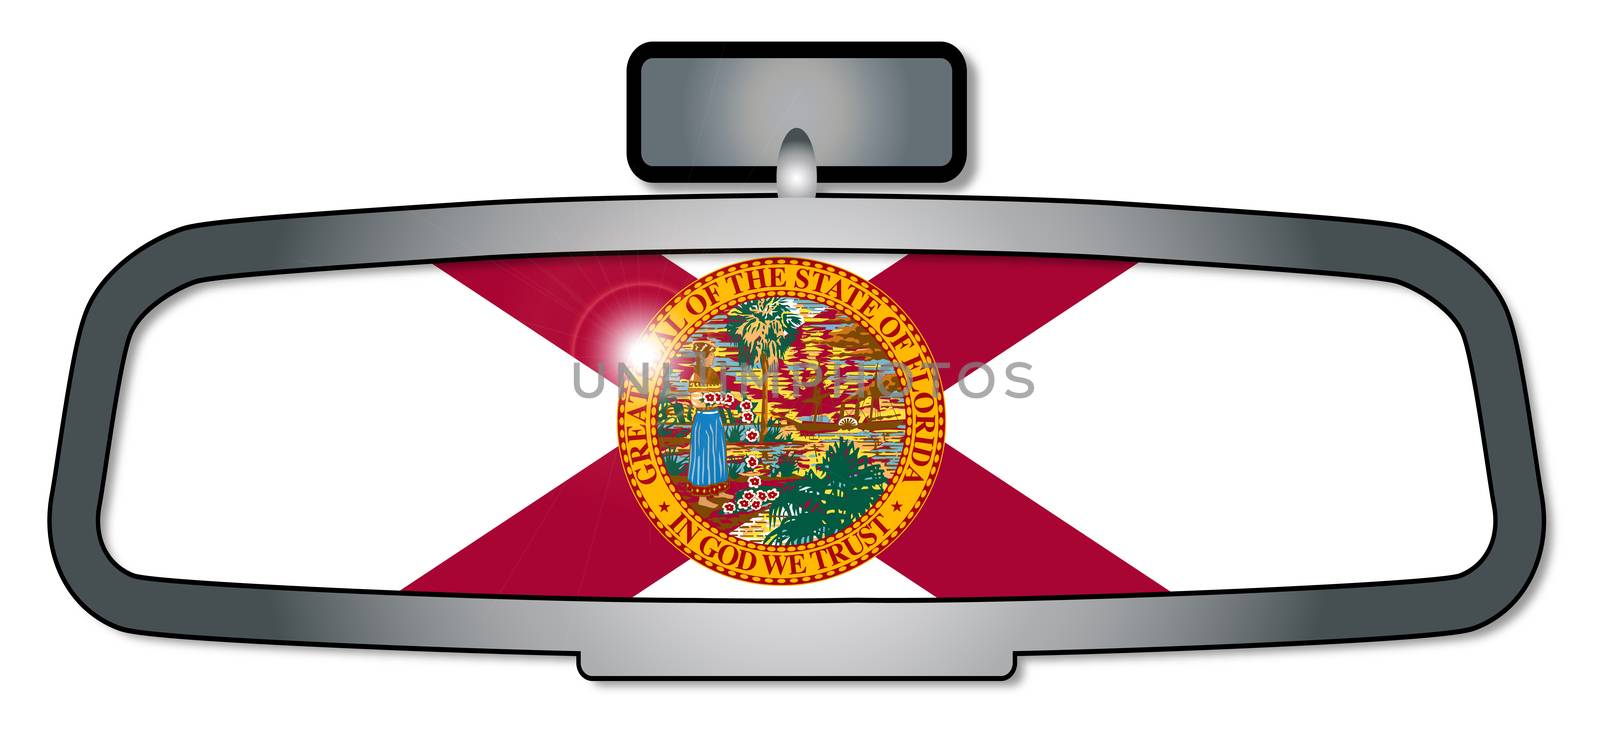 A vehicle rear view mirror with the flag of the state of Florida